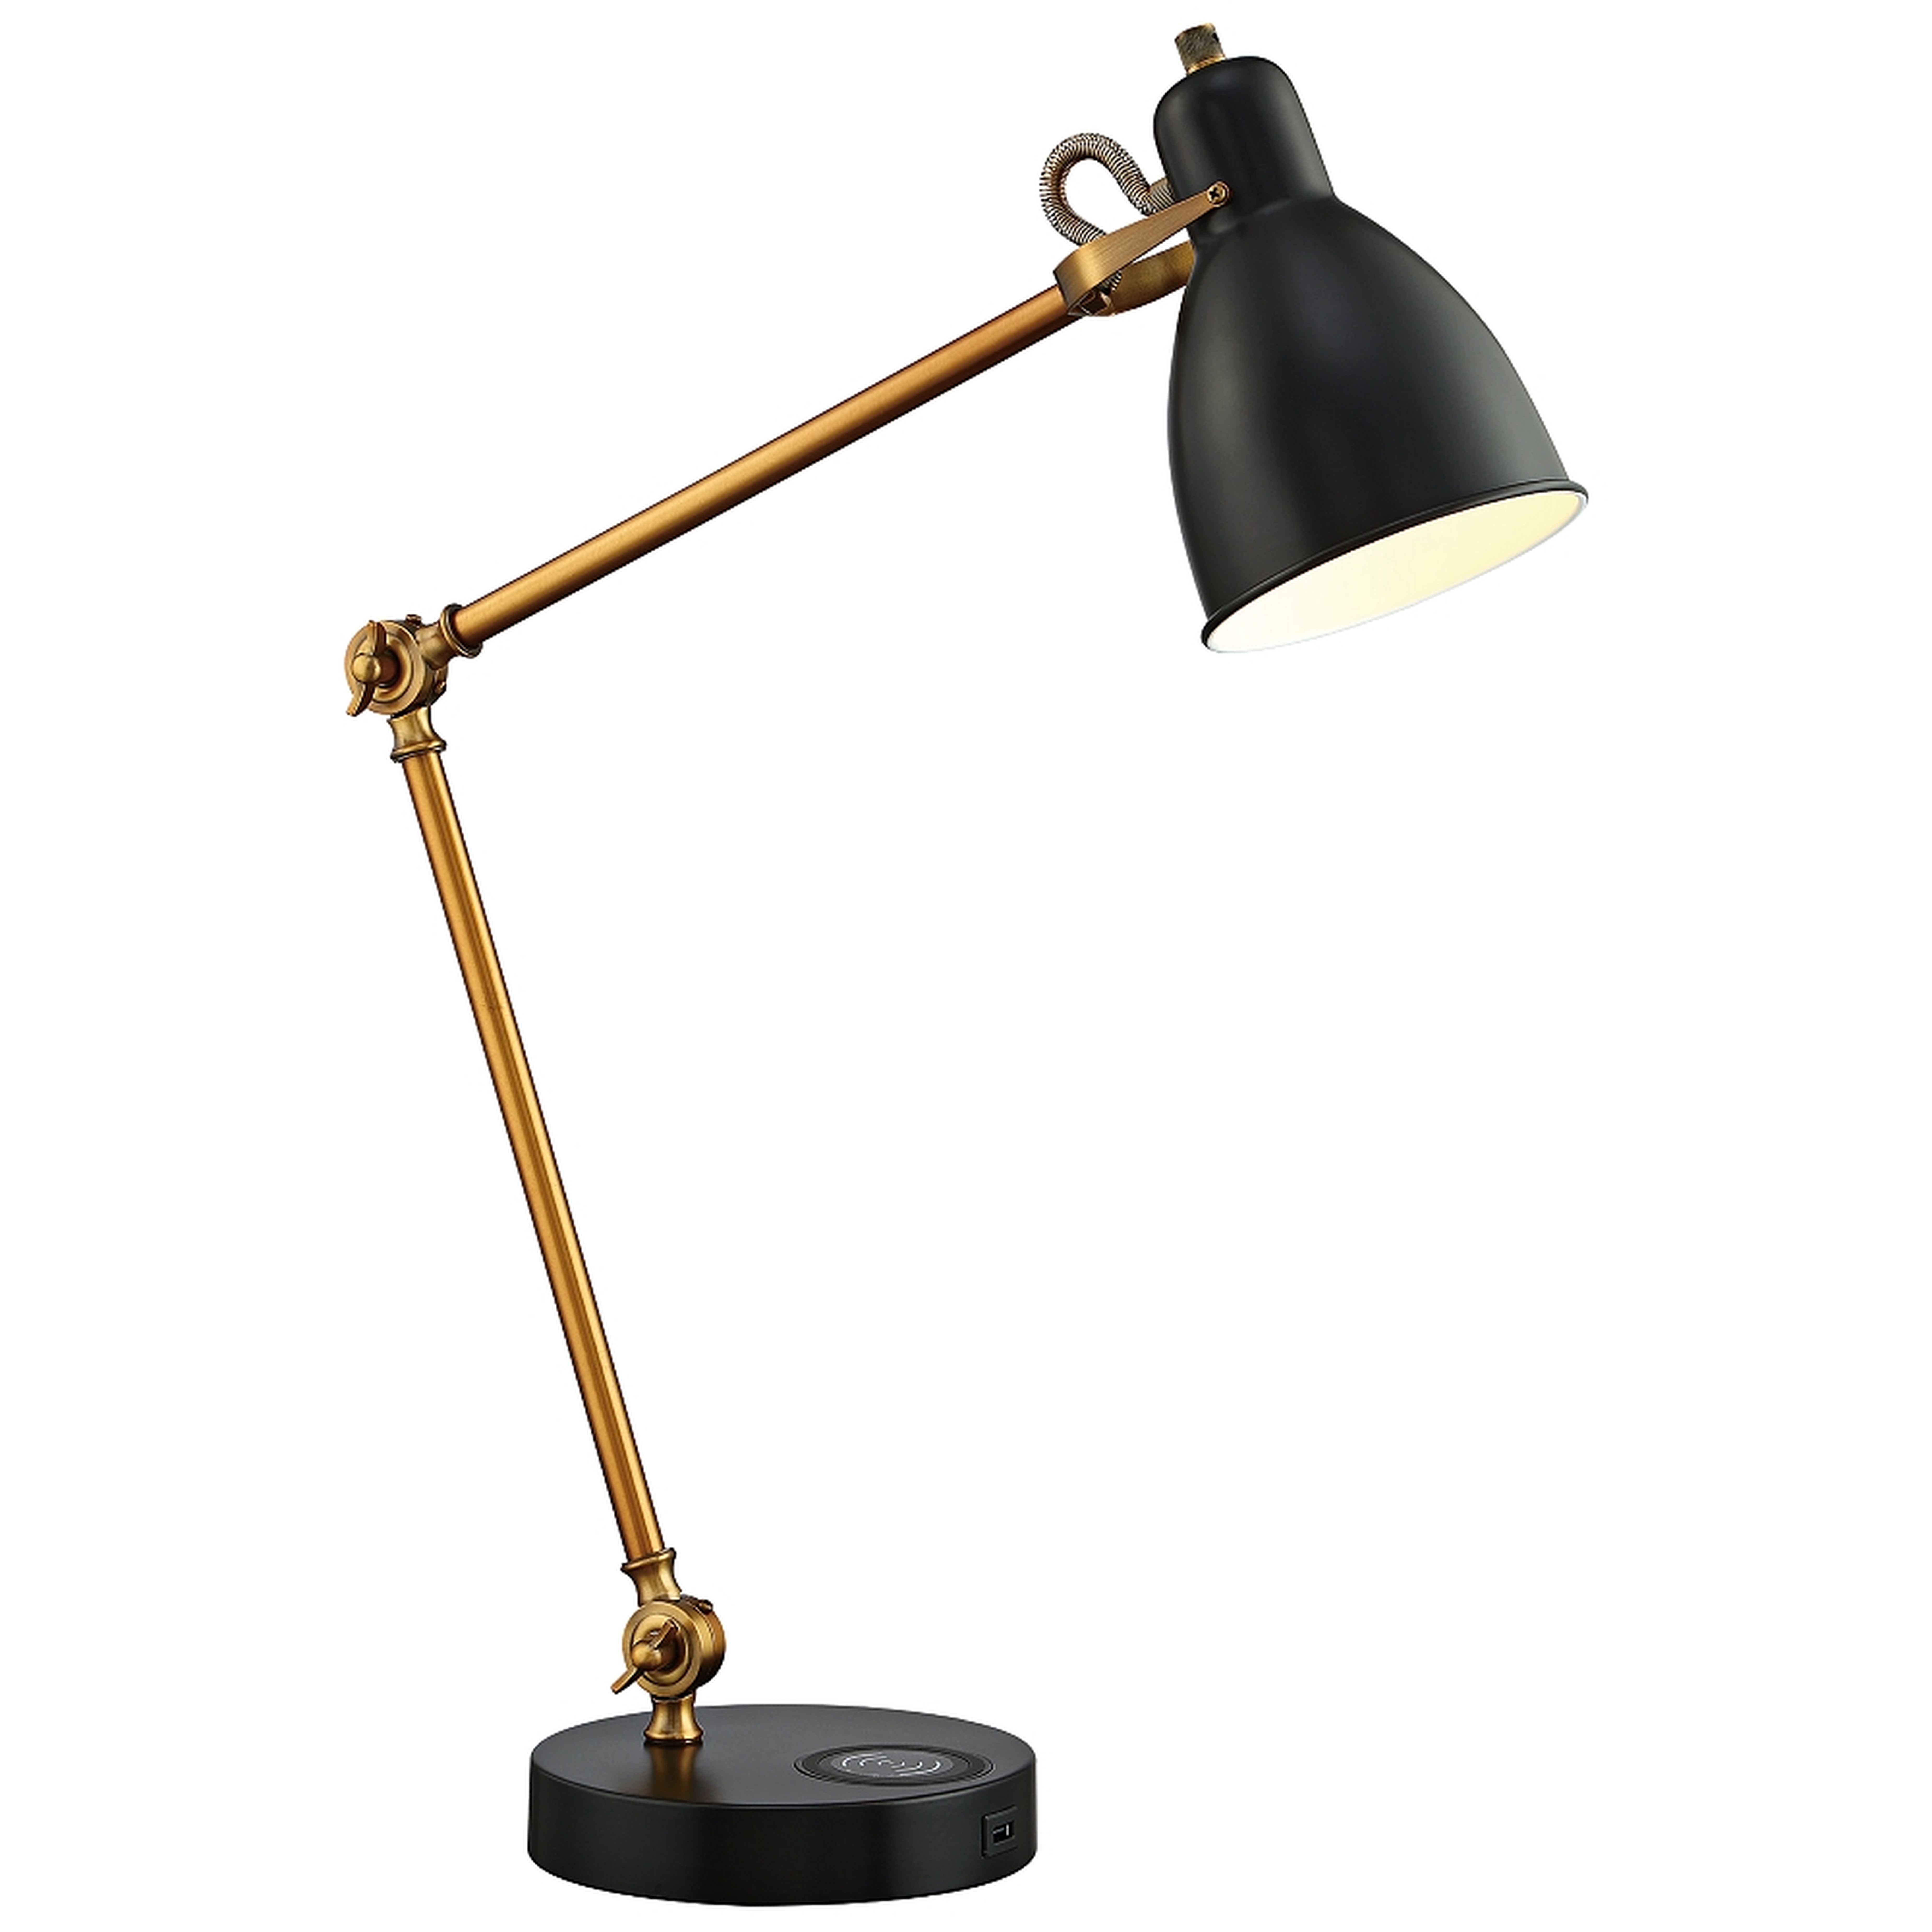 Wellington Desk Lamp with Wireless Charging and USB Port - Lamps Plus